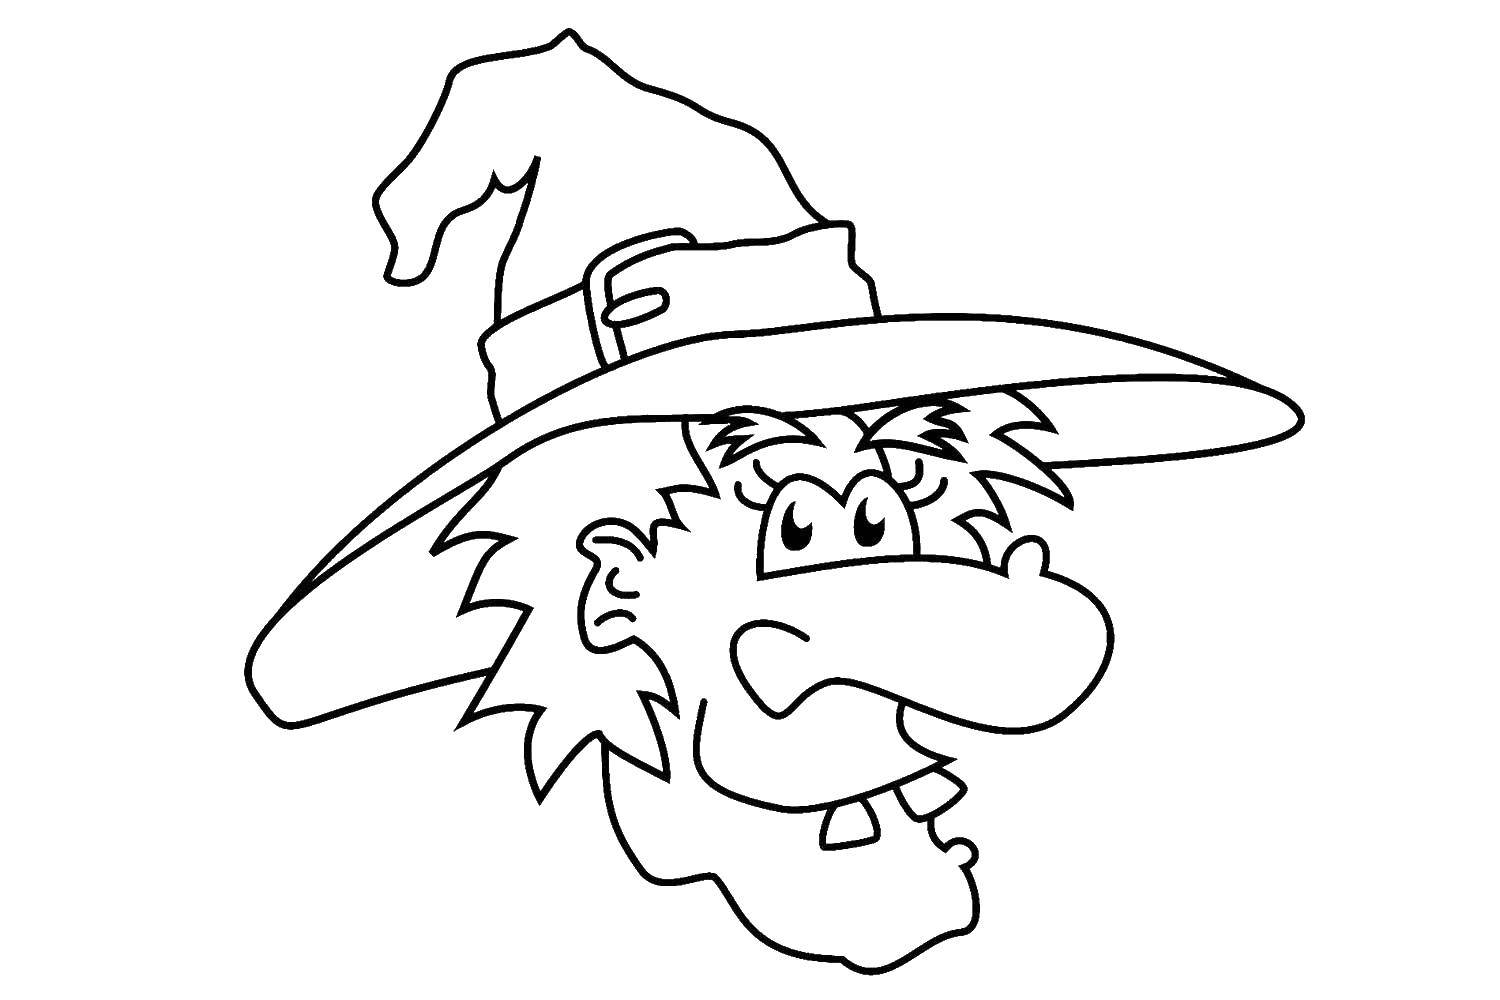 Coloring Witch hat. Category witch. Tags:  witch face, hat.